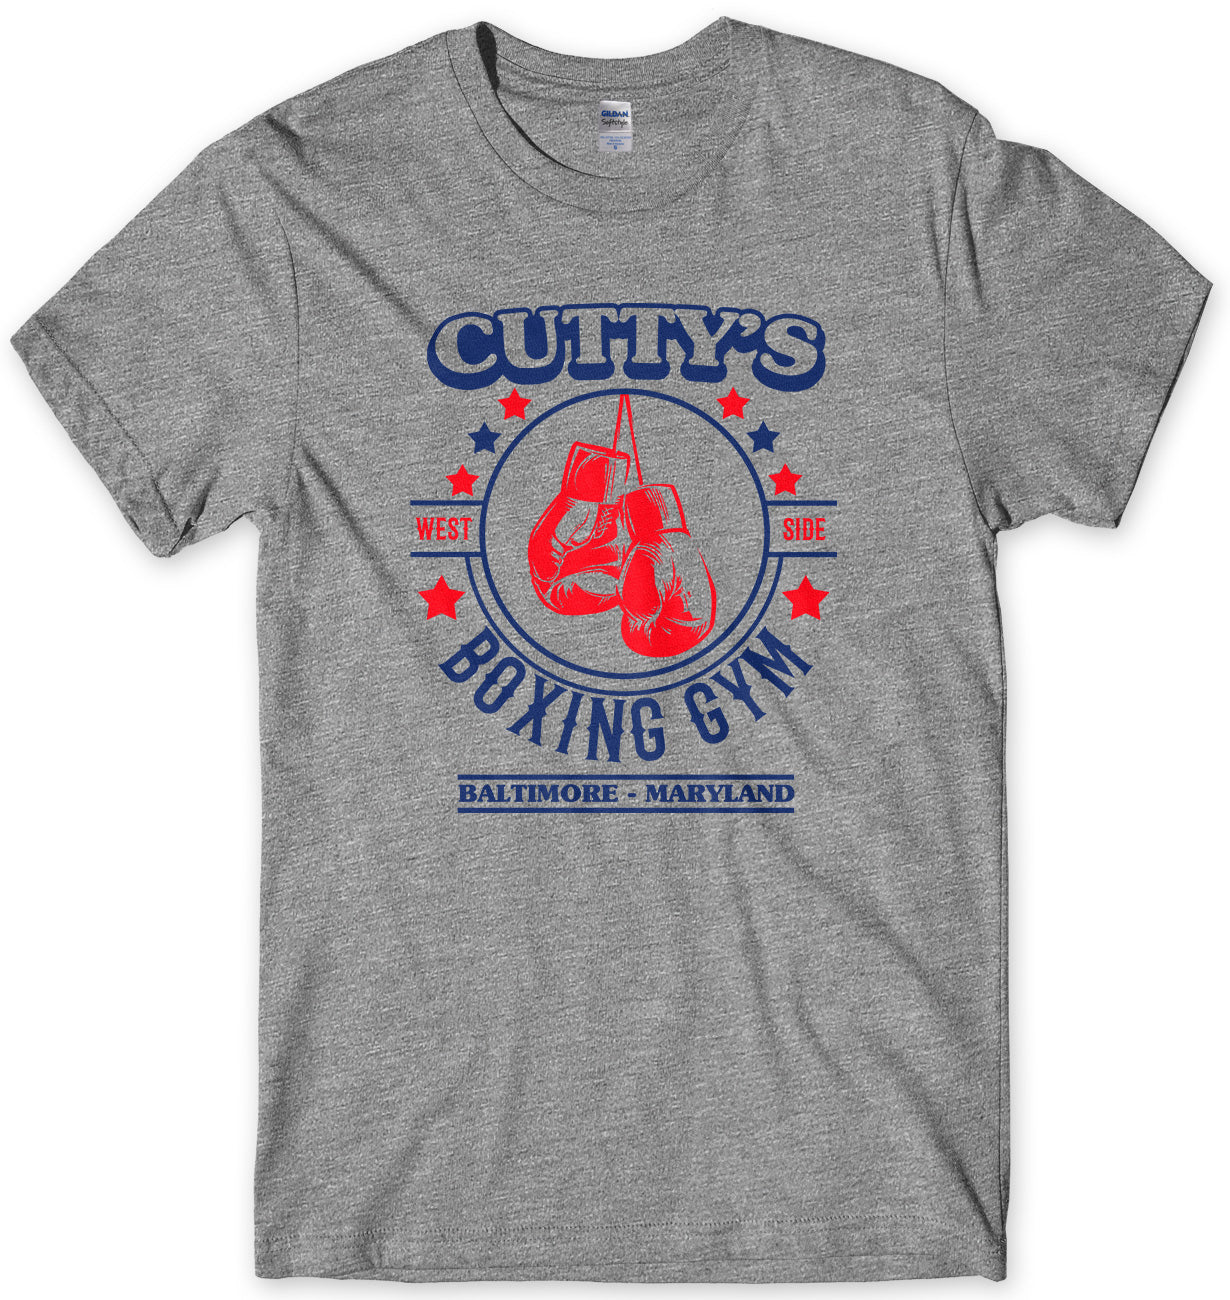 CUTTY'S BOXING GYM - INSPIRED BY THE WIRE MENS UNISEX T-SHIRT